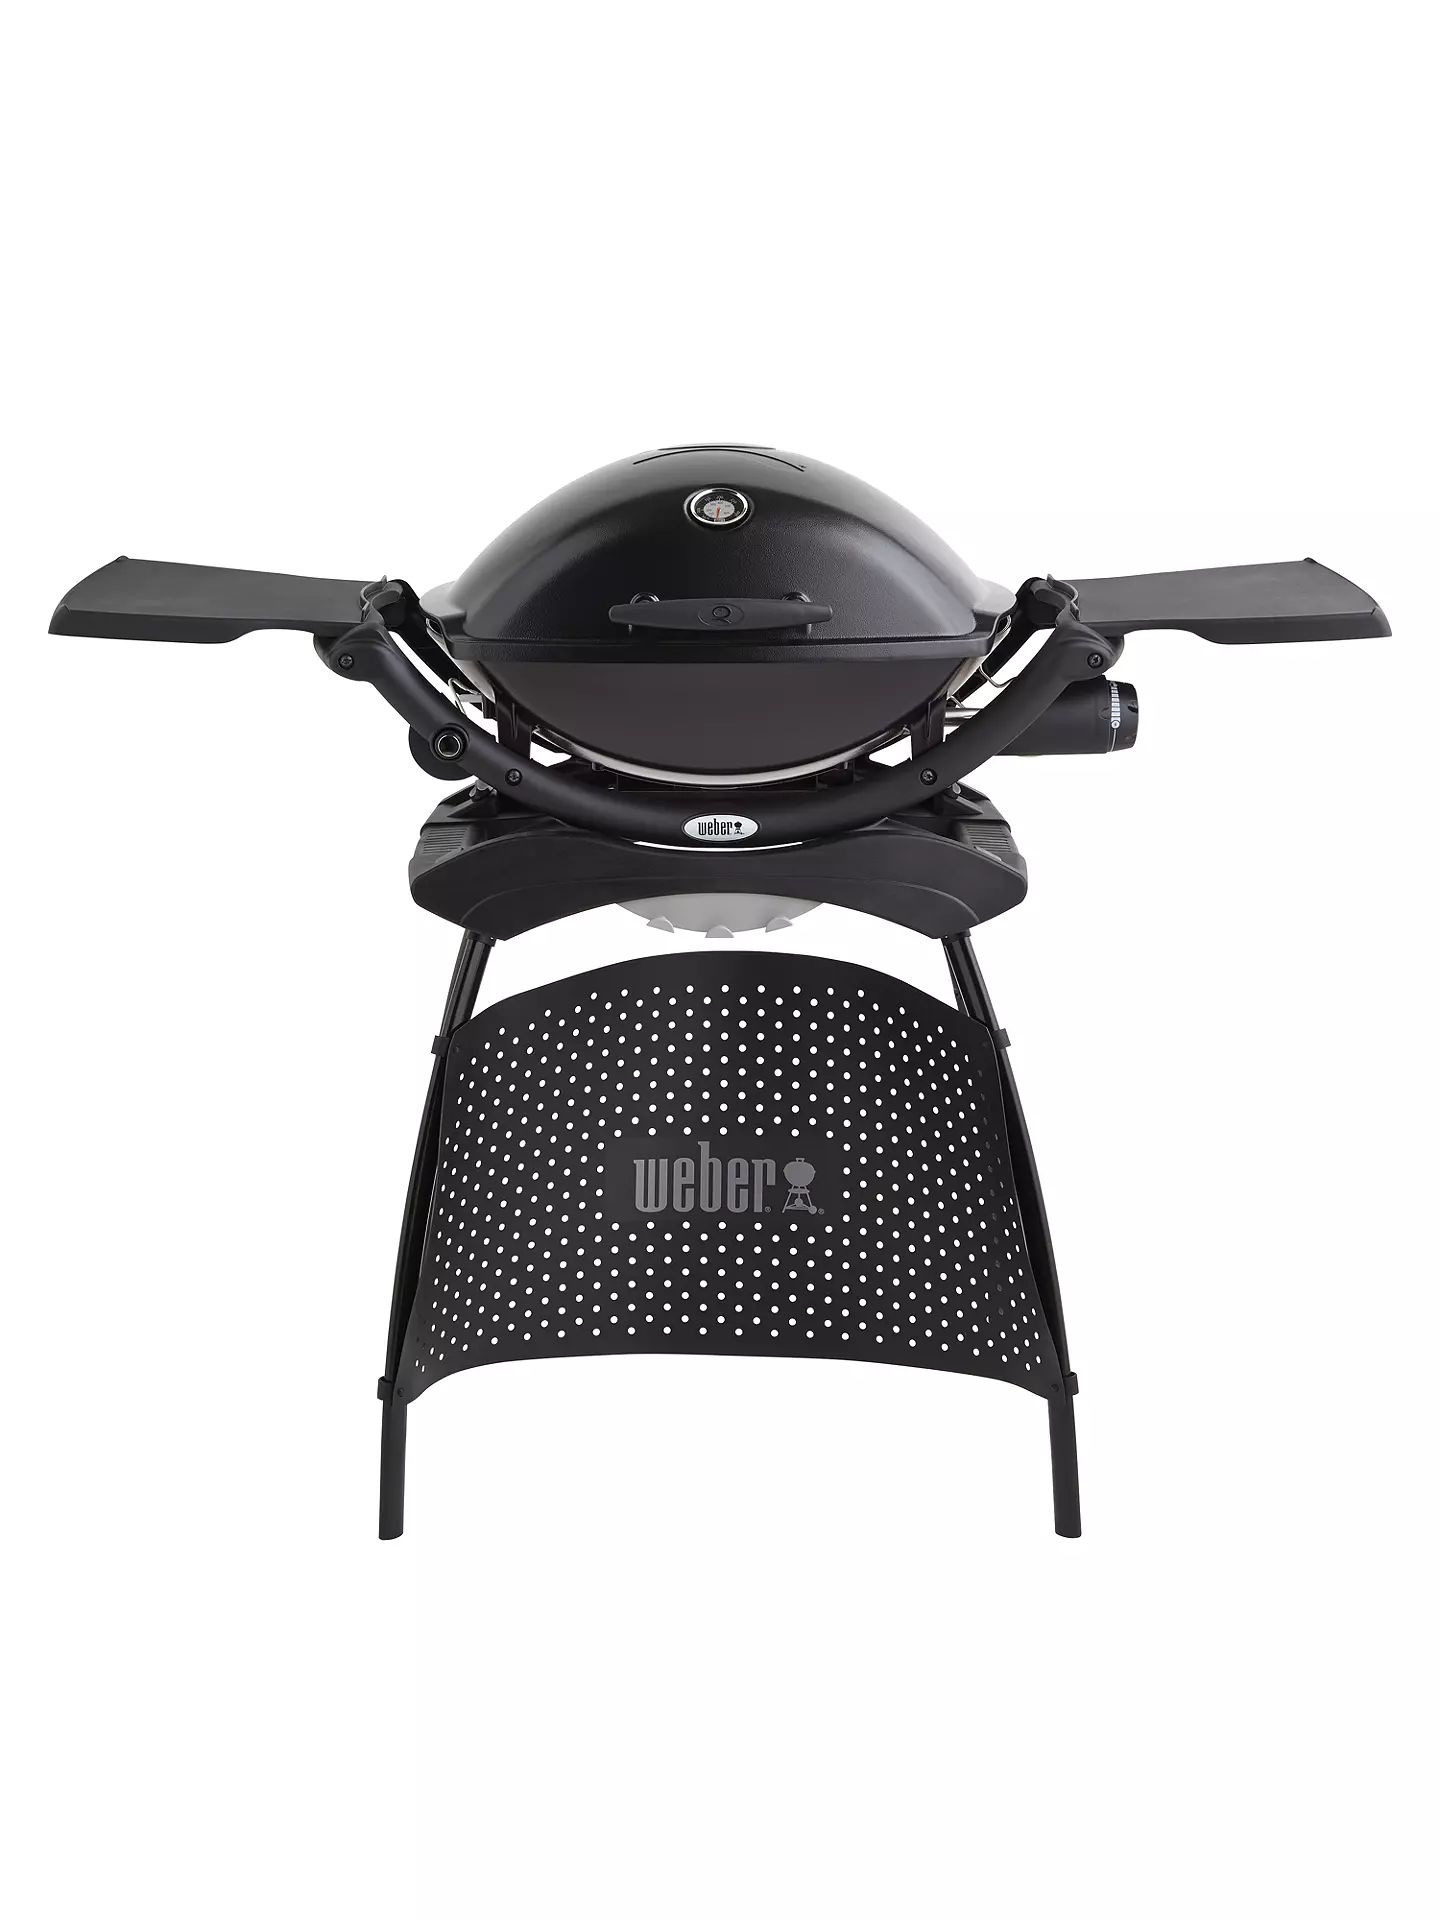 Weber Q2200 Gas BBQ with Stand | John Lewis UK